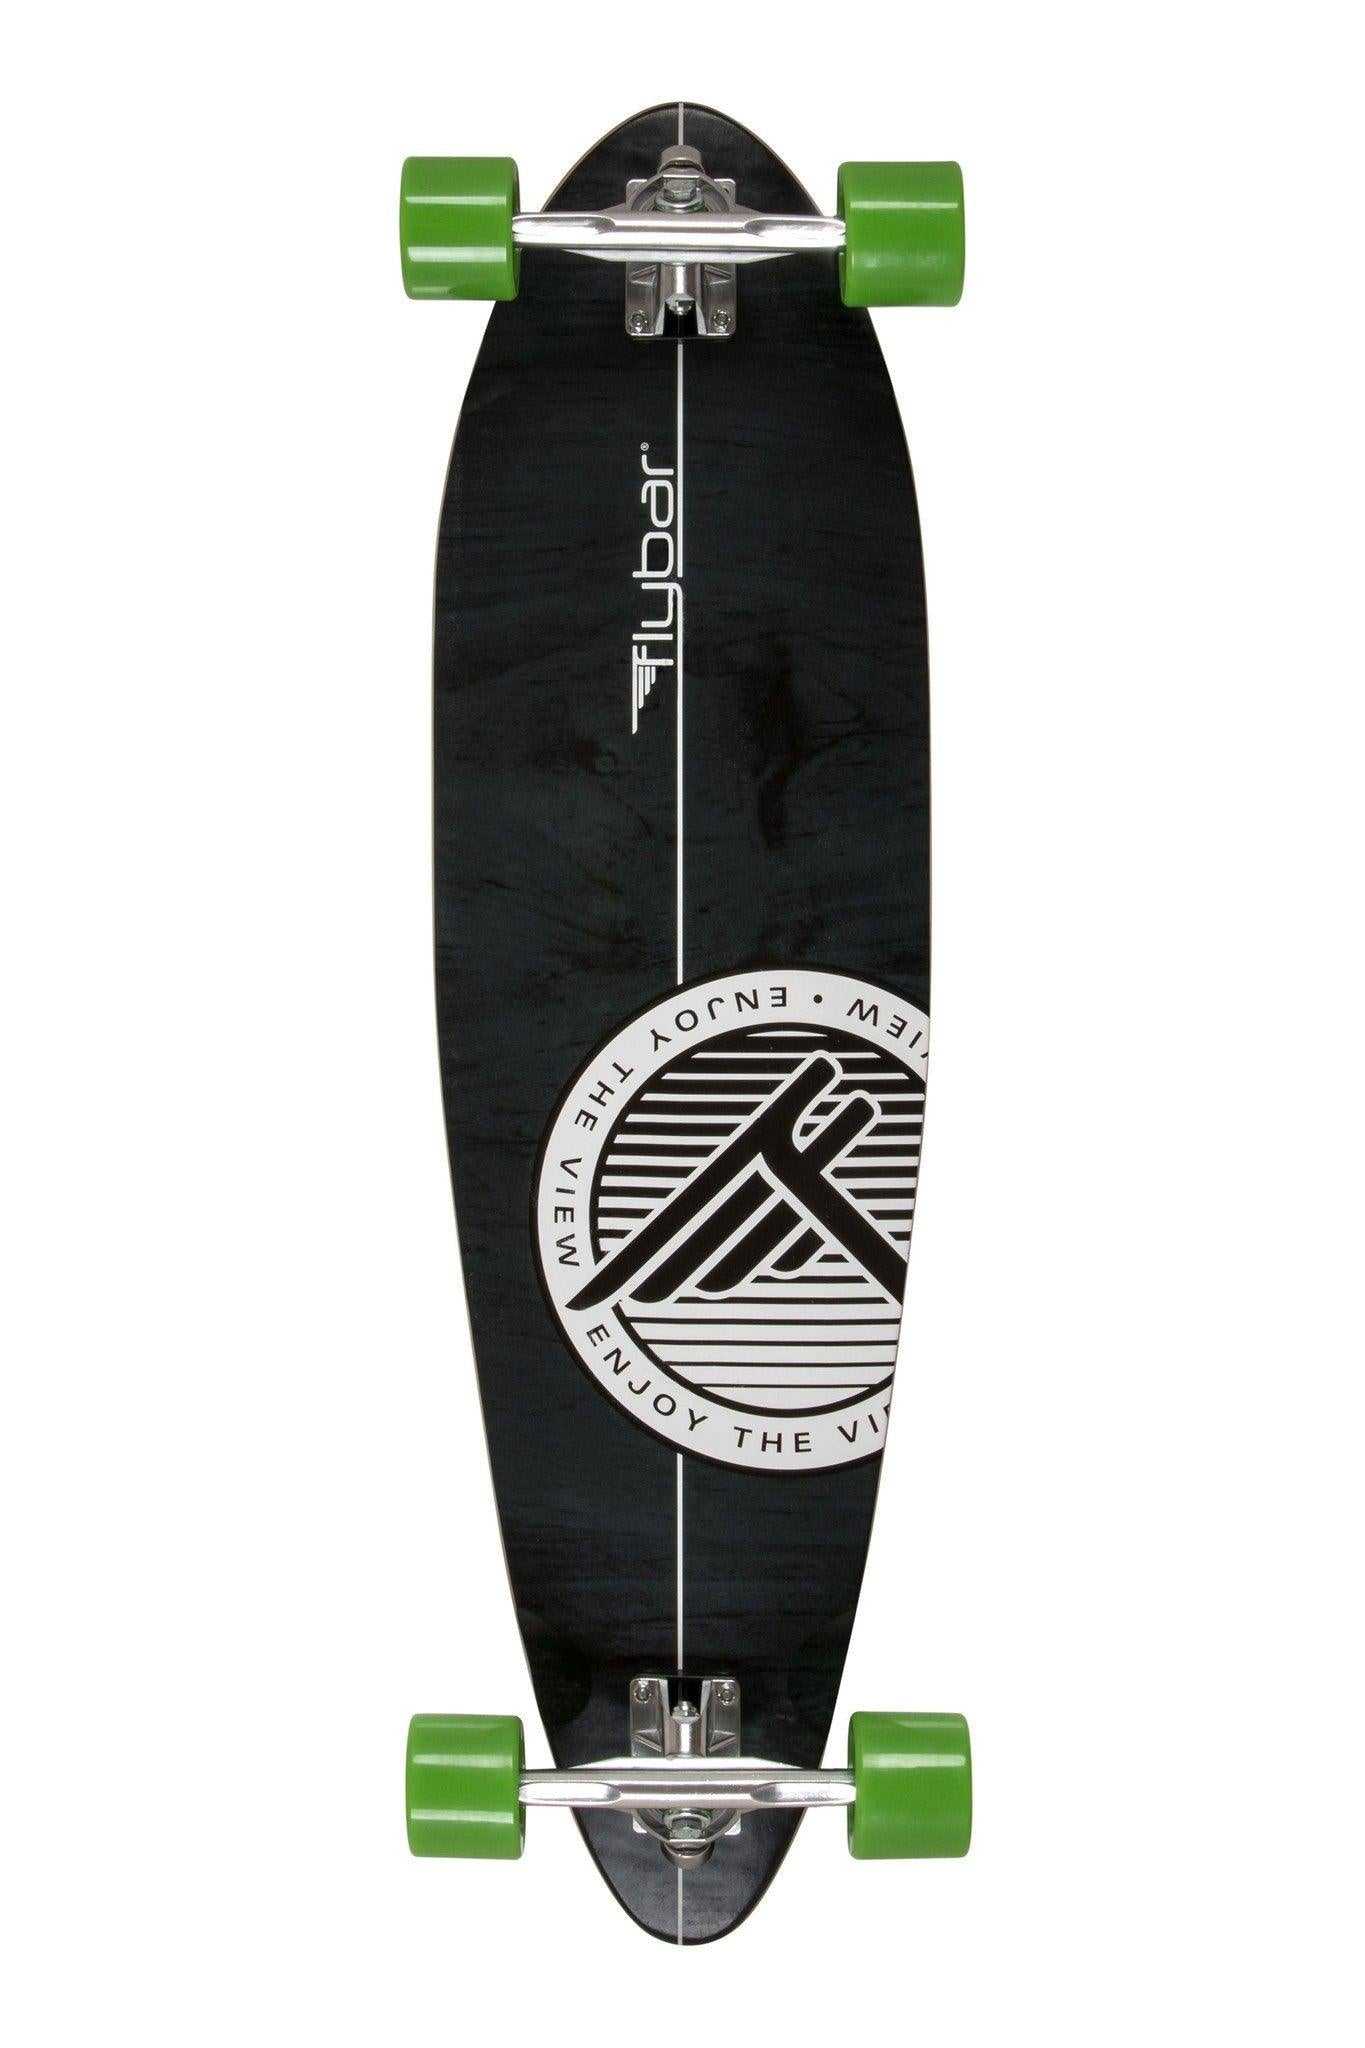 36” Pintail Cruiser Complete Longboard